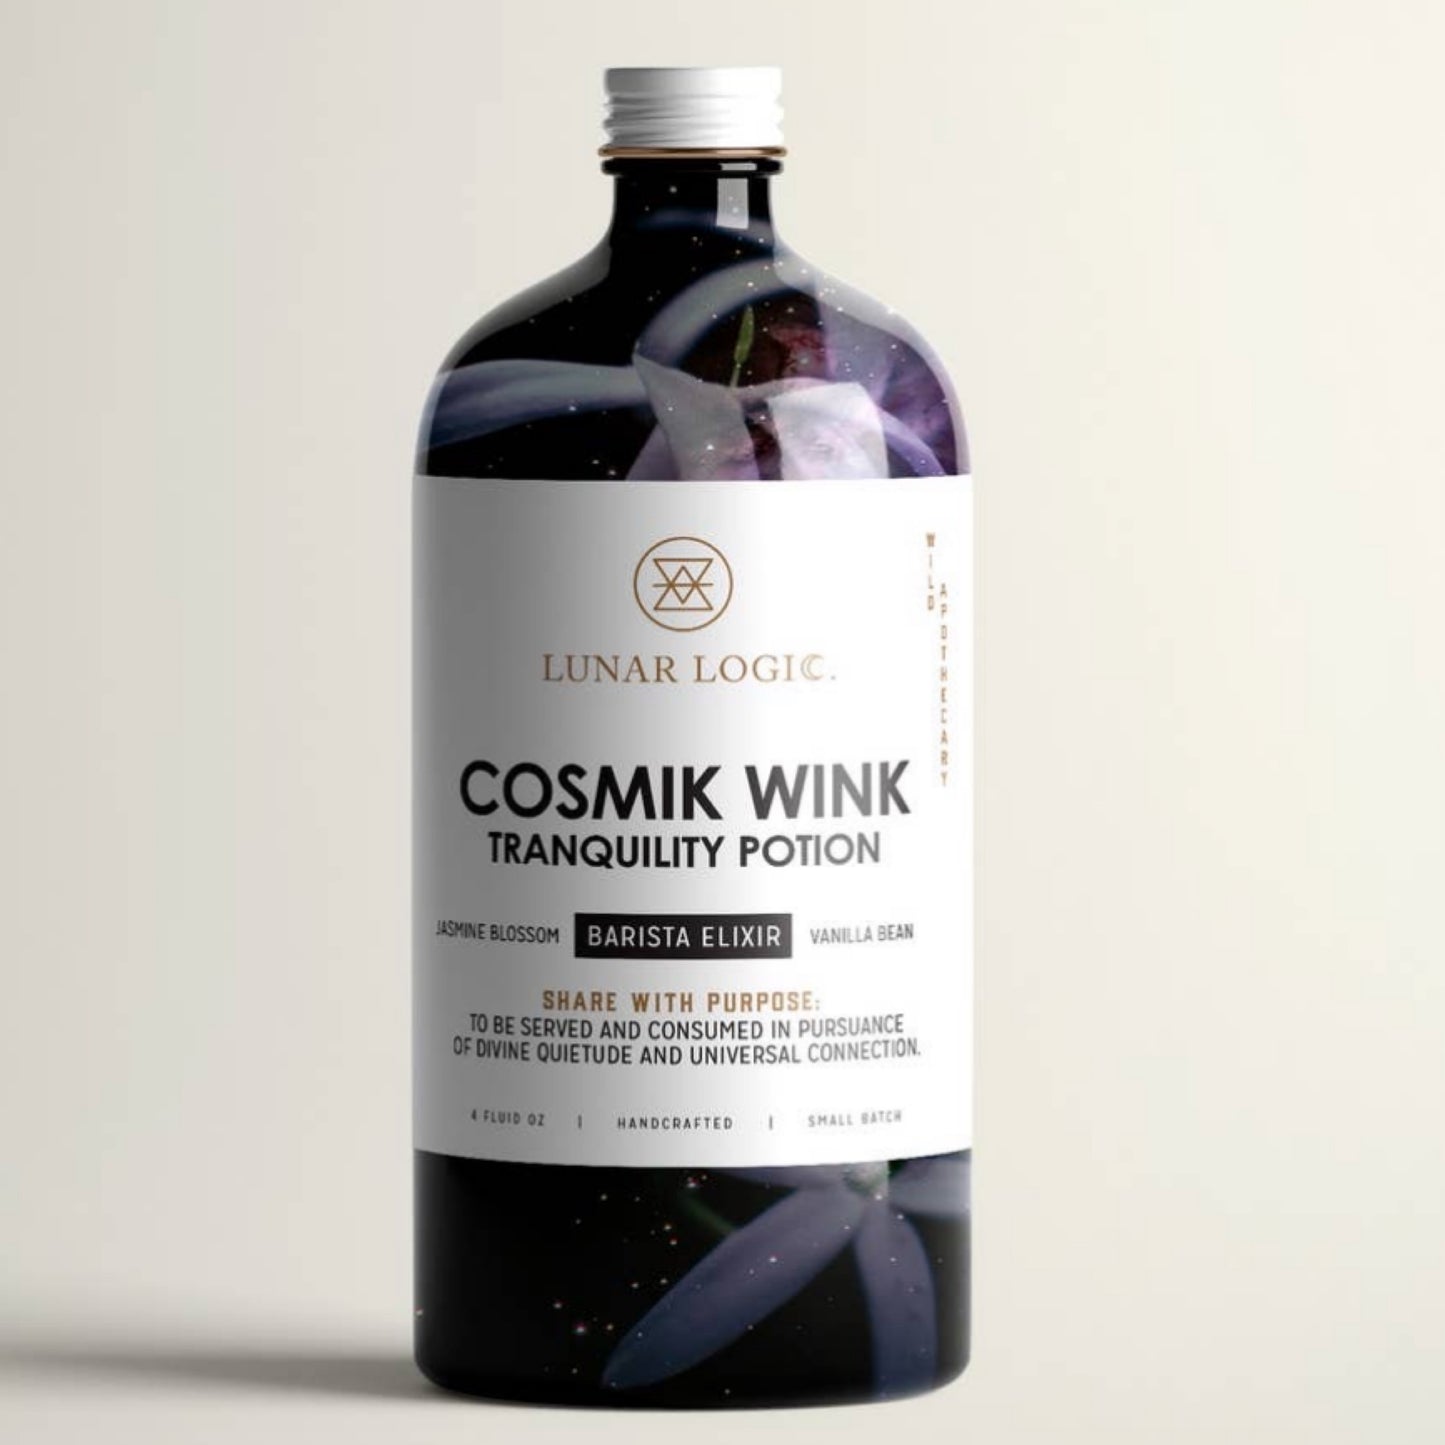 Cosmic Wink Tranquility Potion